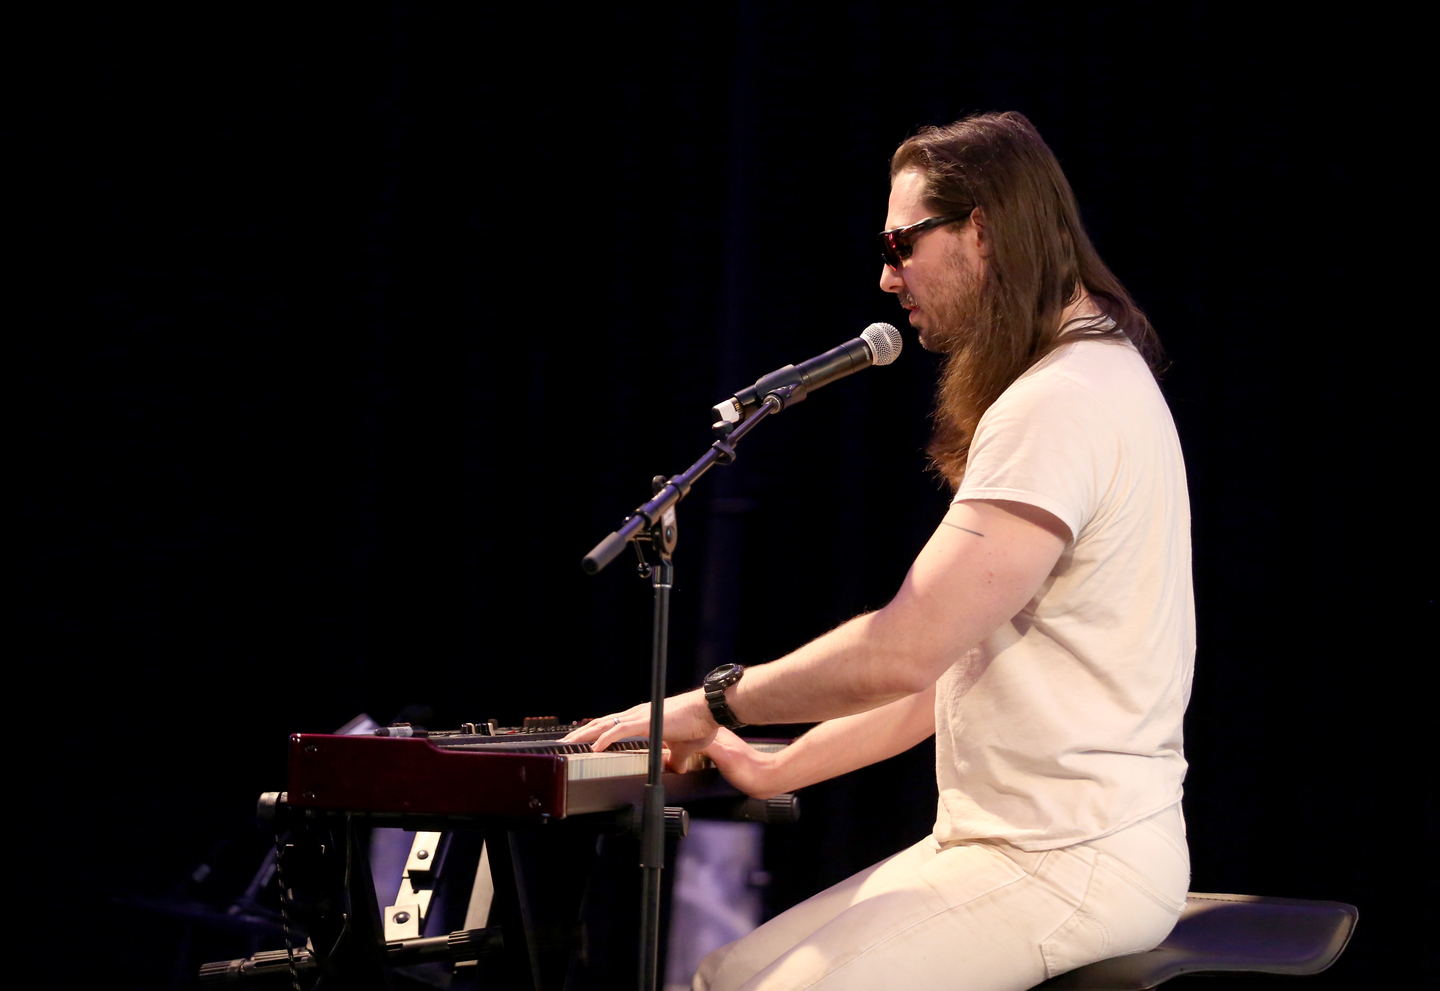 Andrew WK at the Heavenly Pop Hit Featured Session – Photo by Diego Donamaria/Getty Images for SXSW